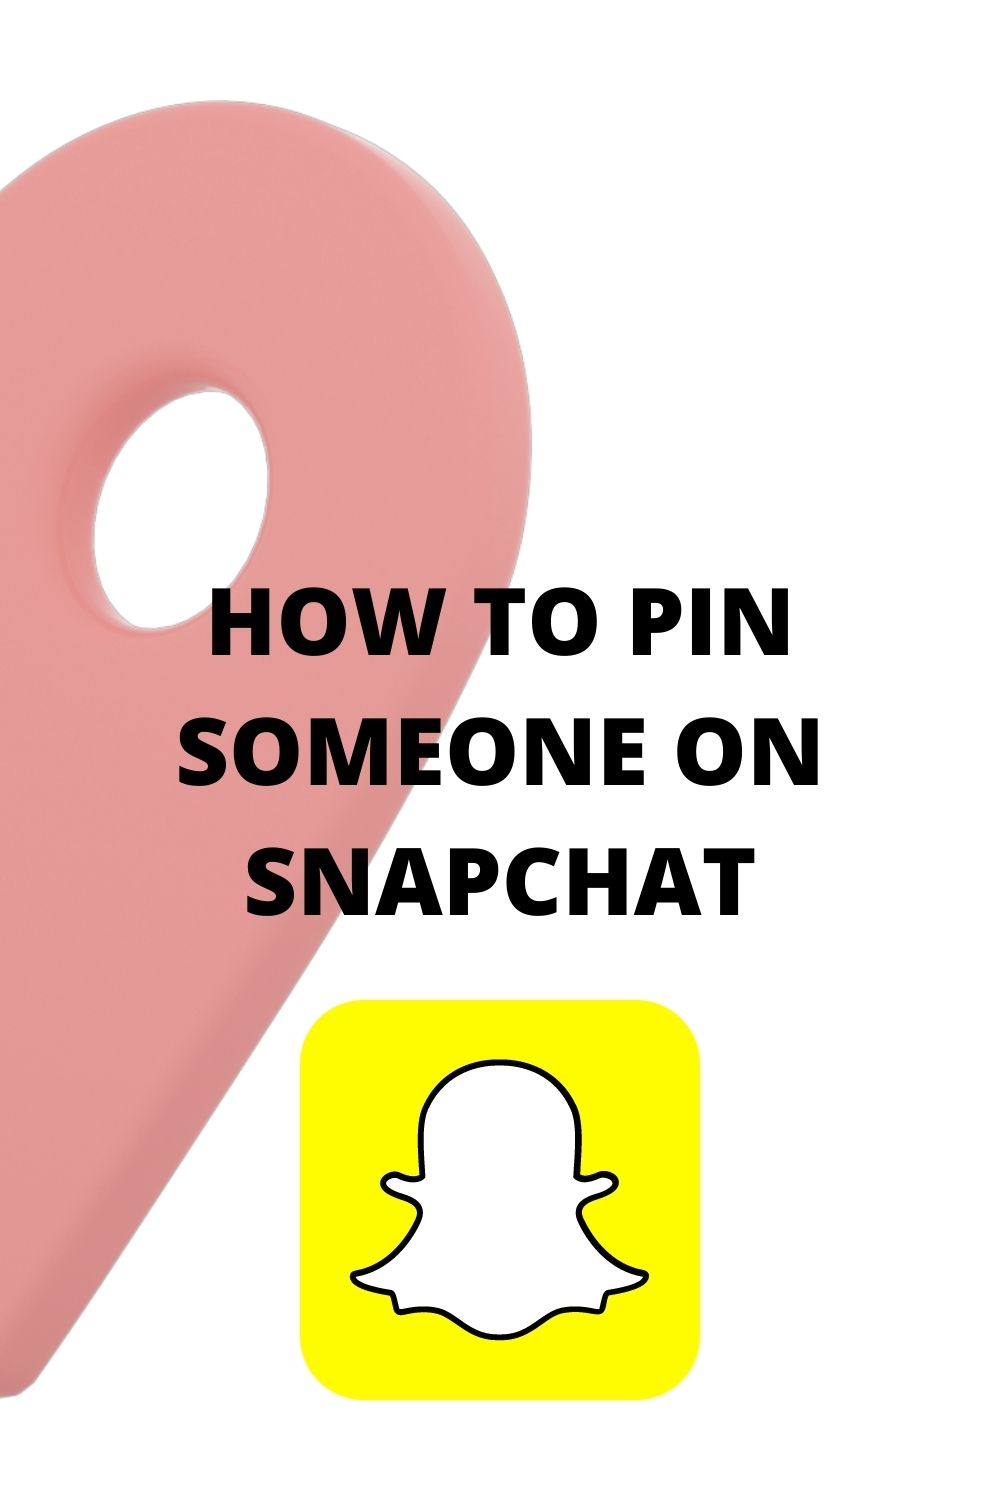 How to pin someone on Snapchat android